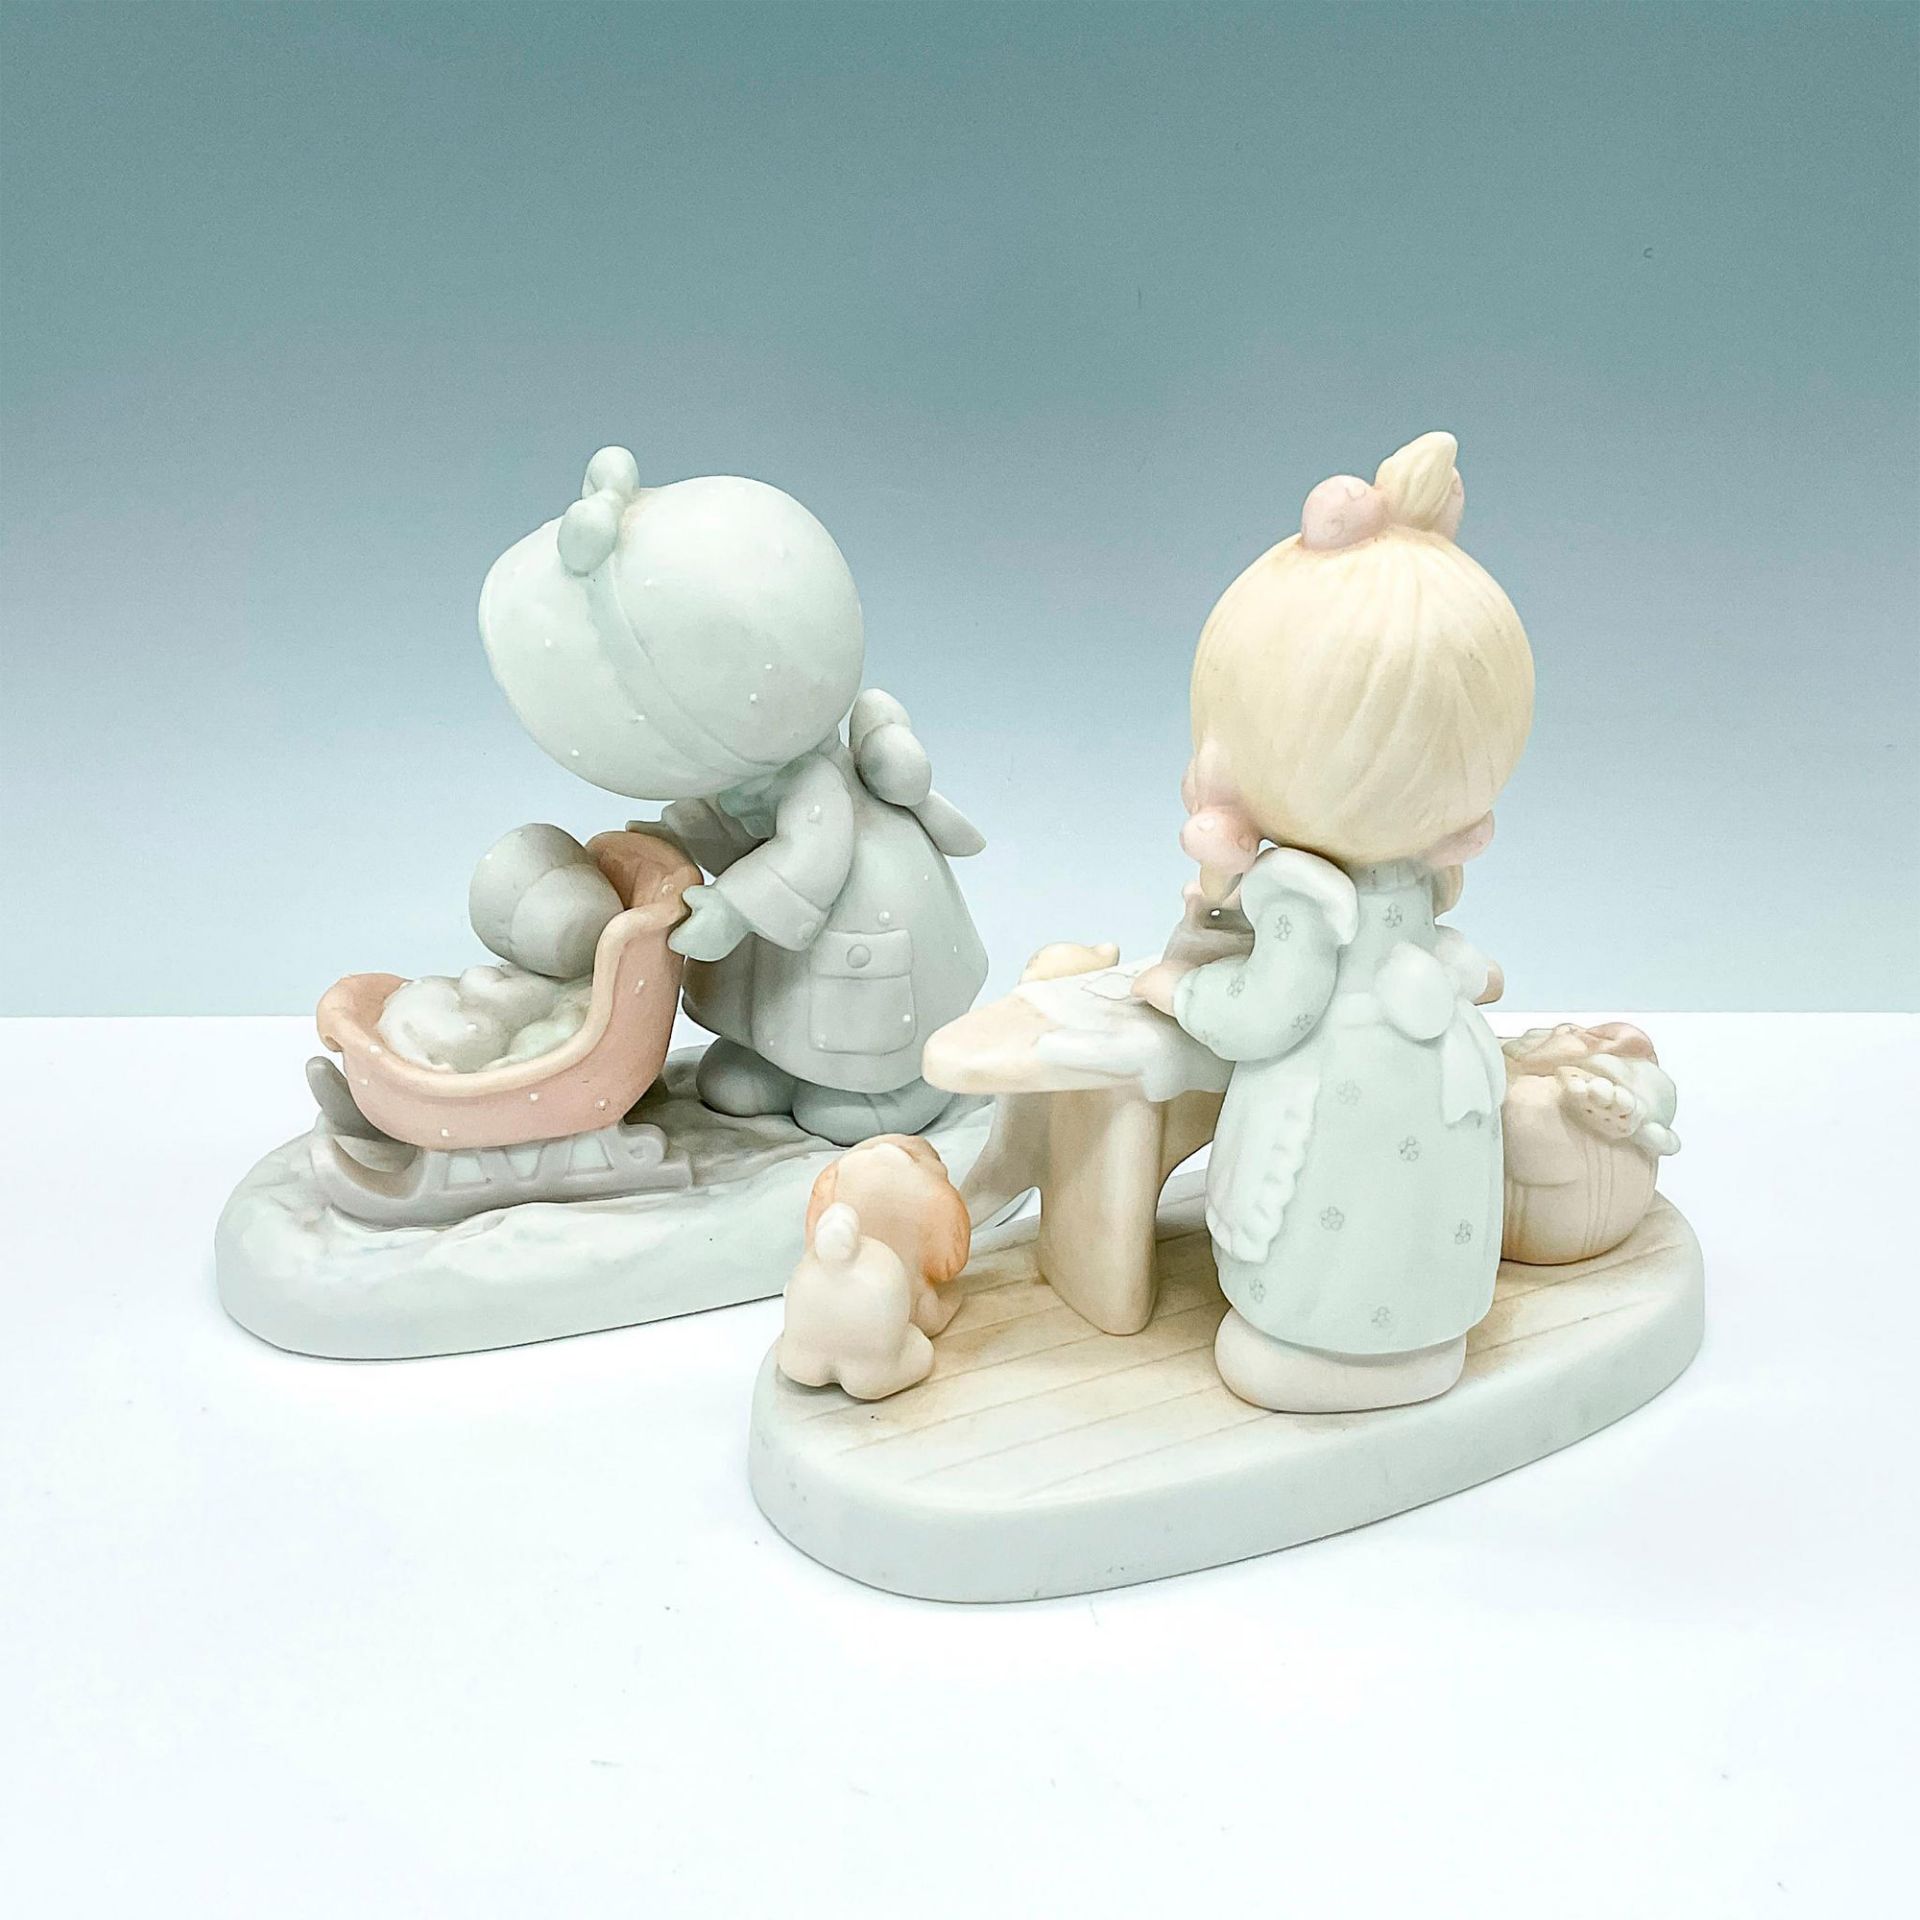 2pc Precious Moments Porcelain Figurines - Image 2 of 3